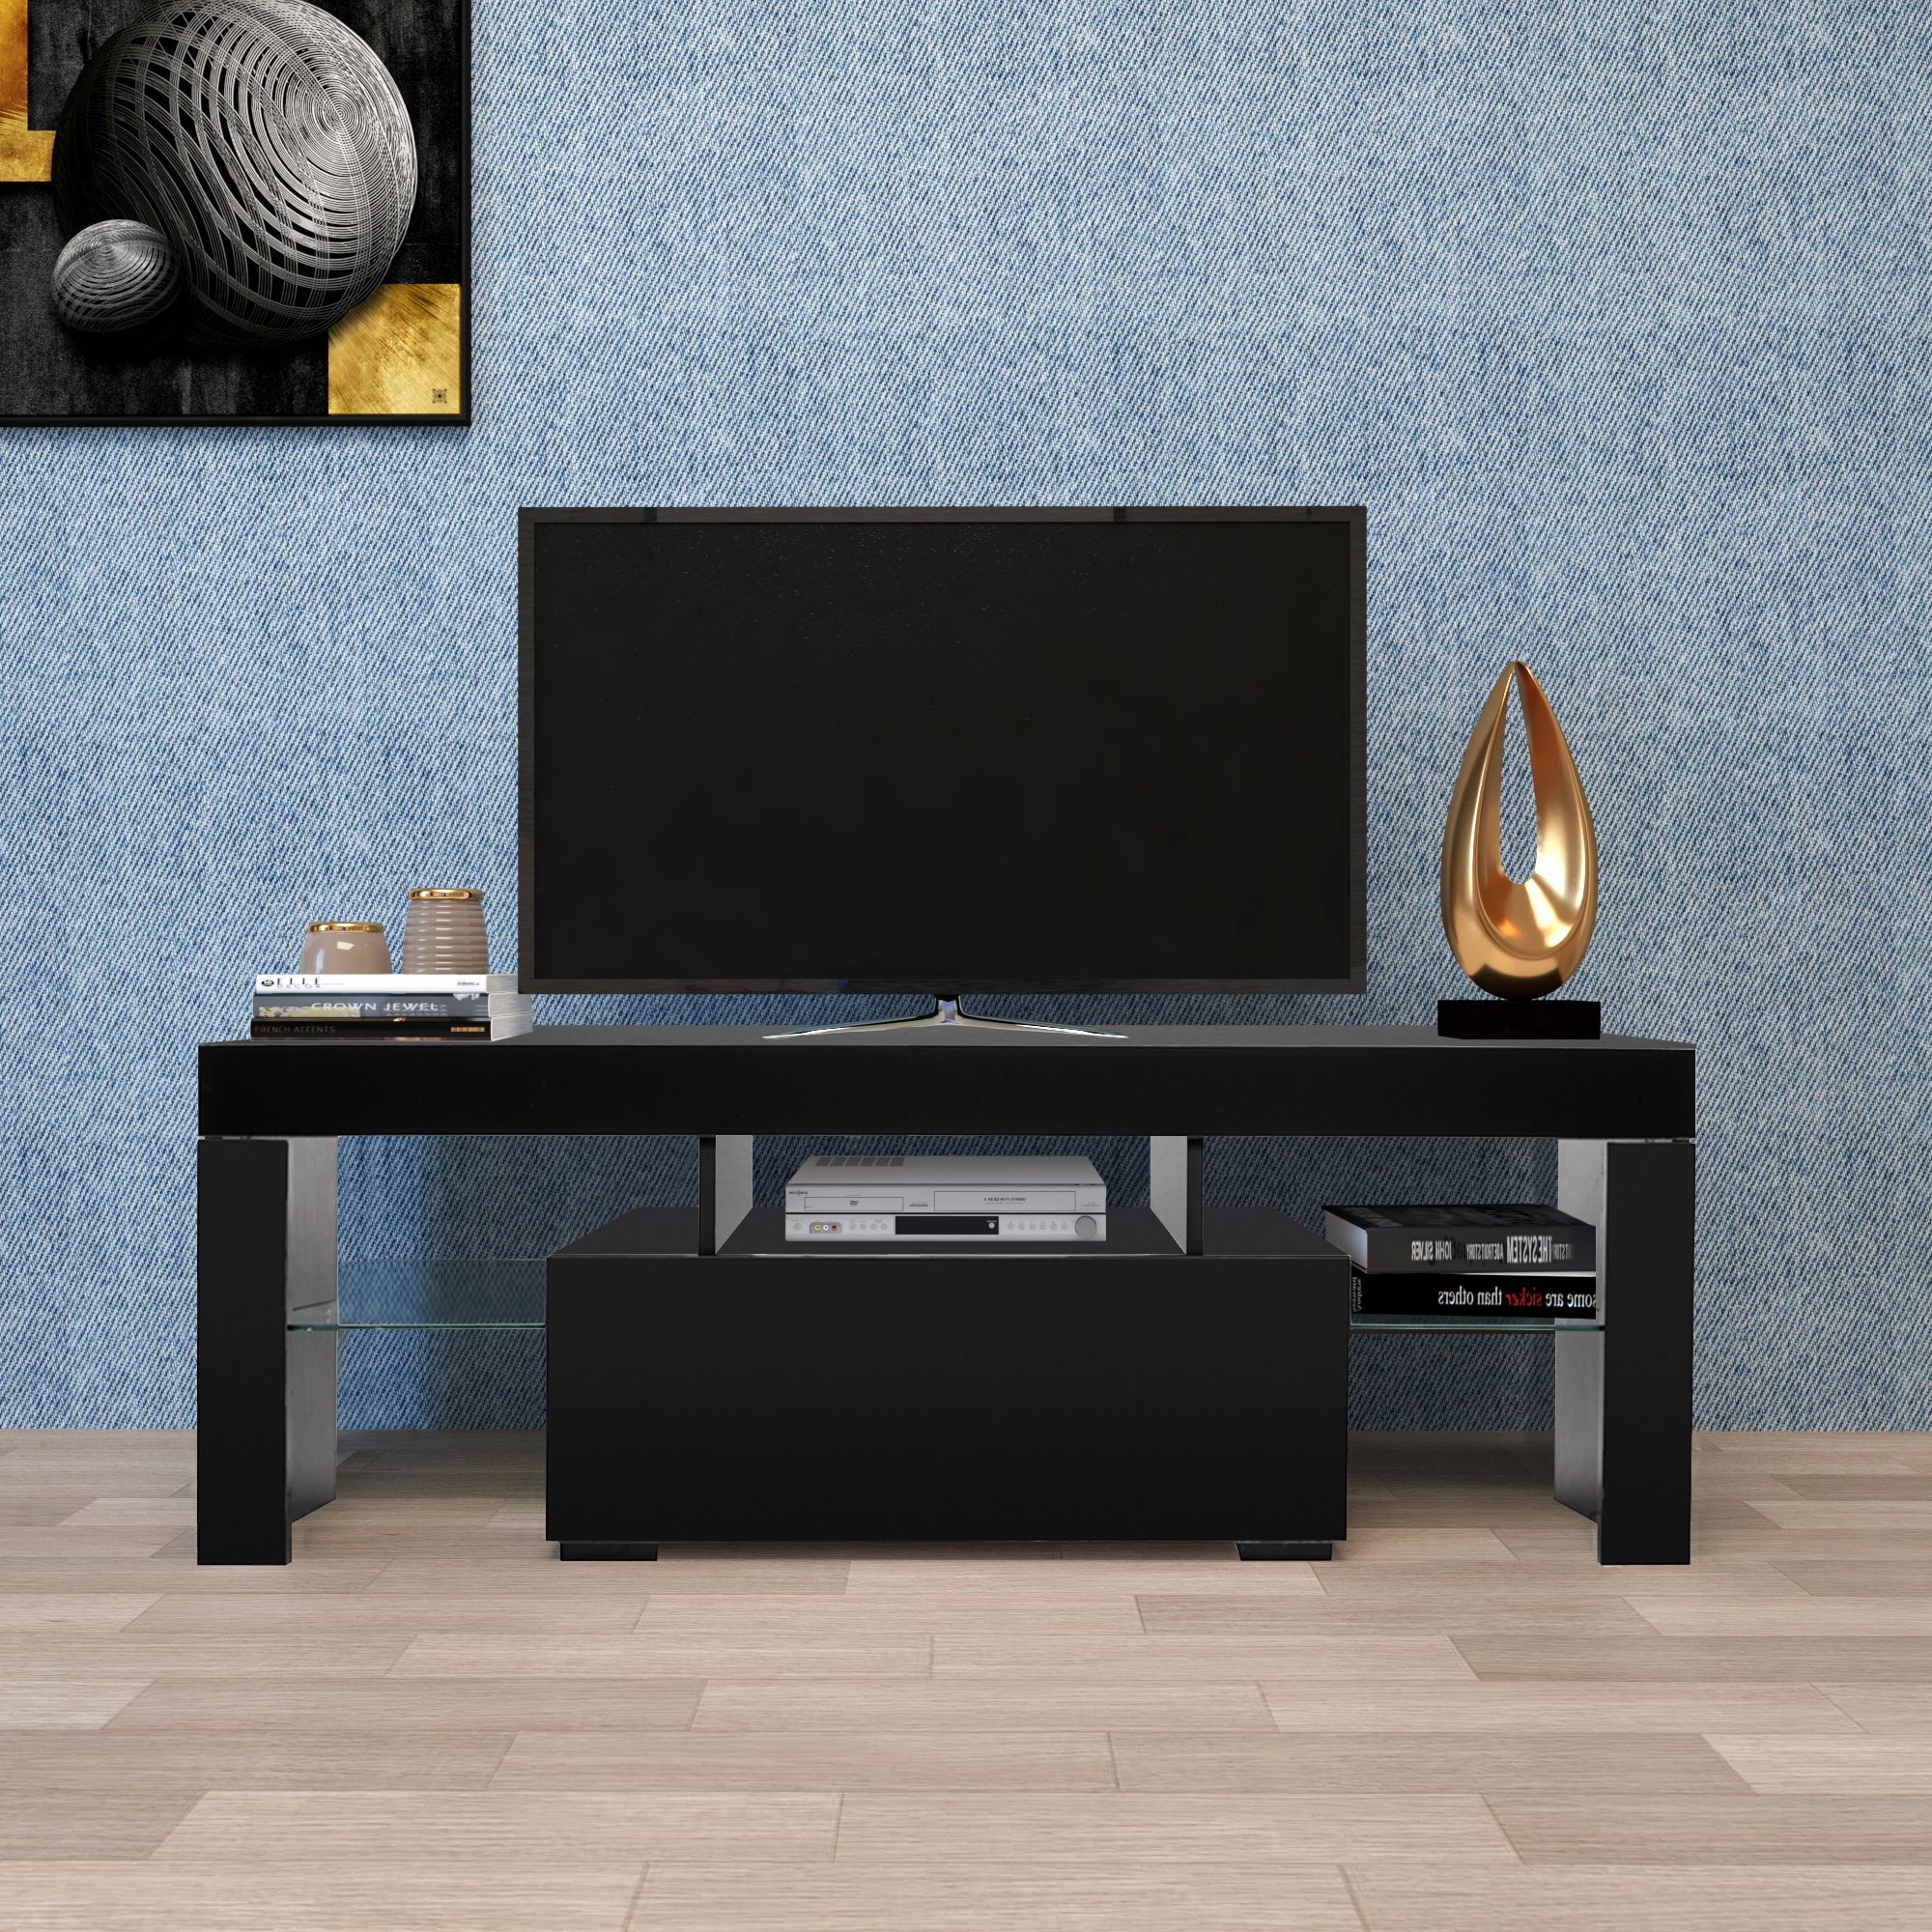 Entertainment Centers And Tv Stands, Yofe Tv Stand With Regarding Zimtown Tv Stands With High Gloss Led Lights (View 7 of 15)